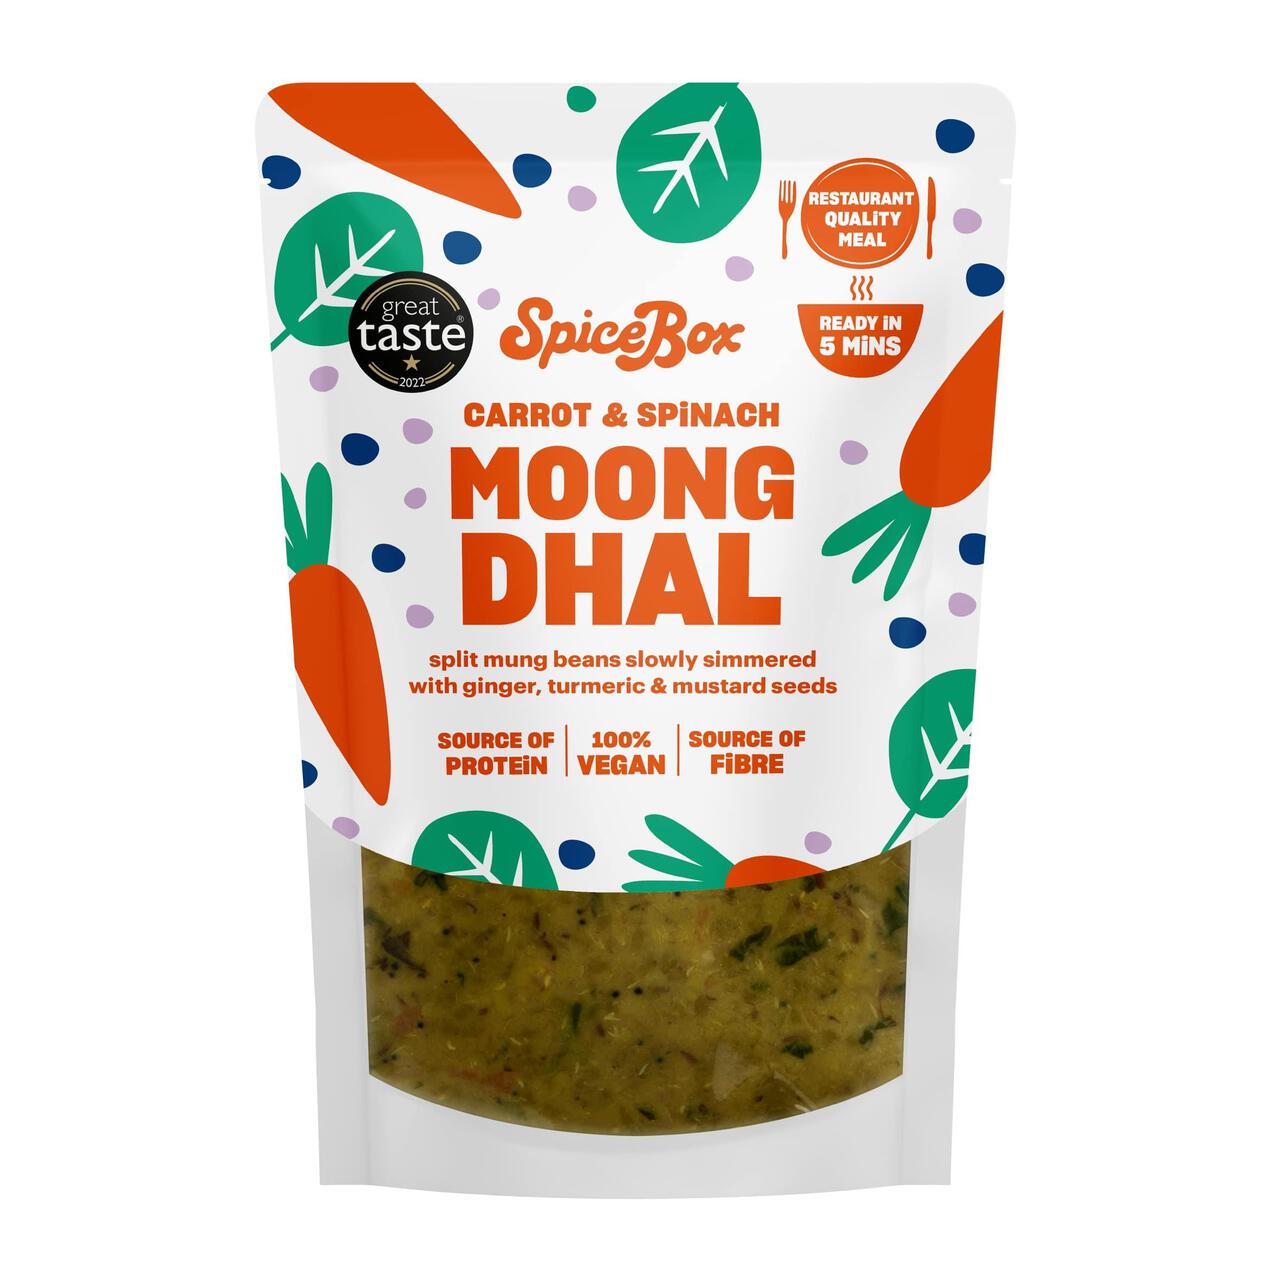 Spice Box - Carrot & Spinach Moong Dhal 475g